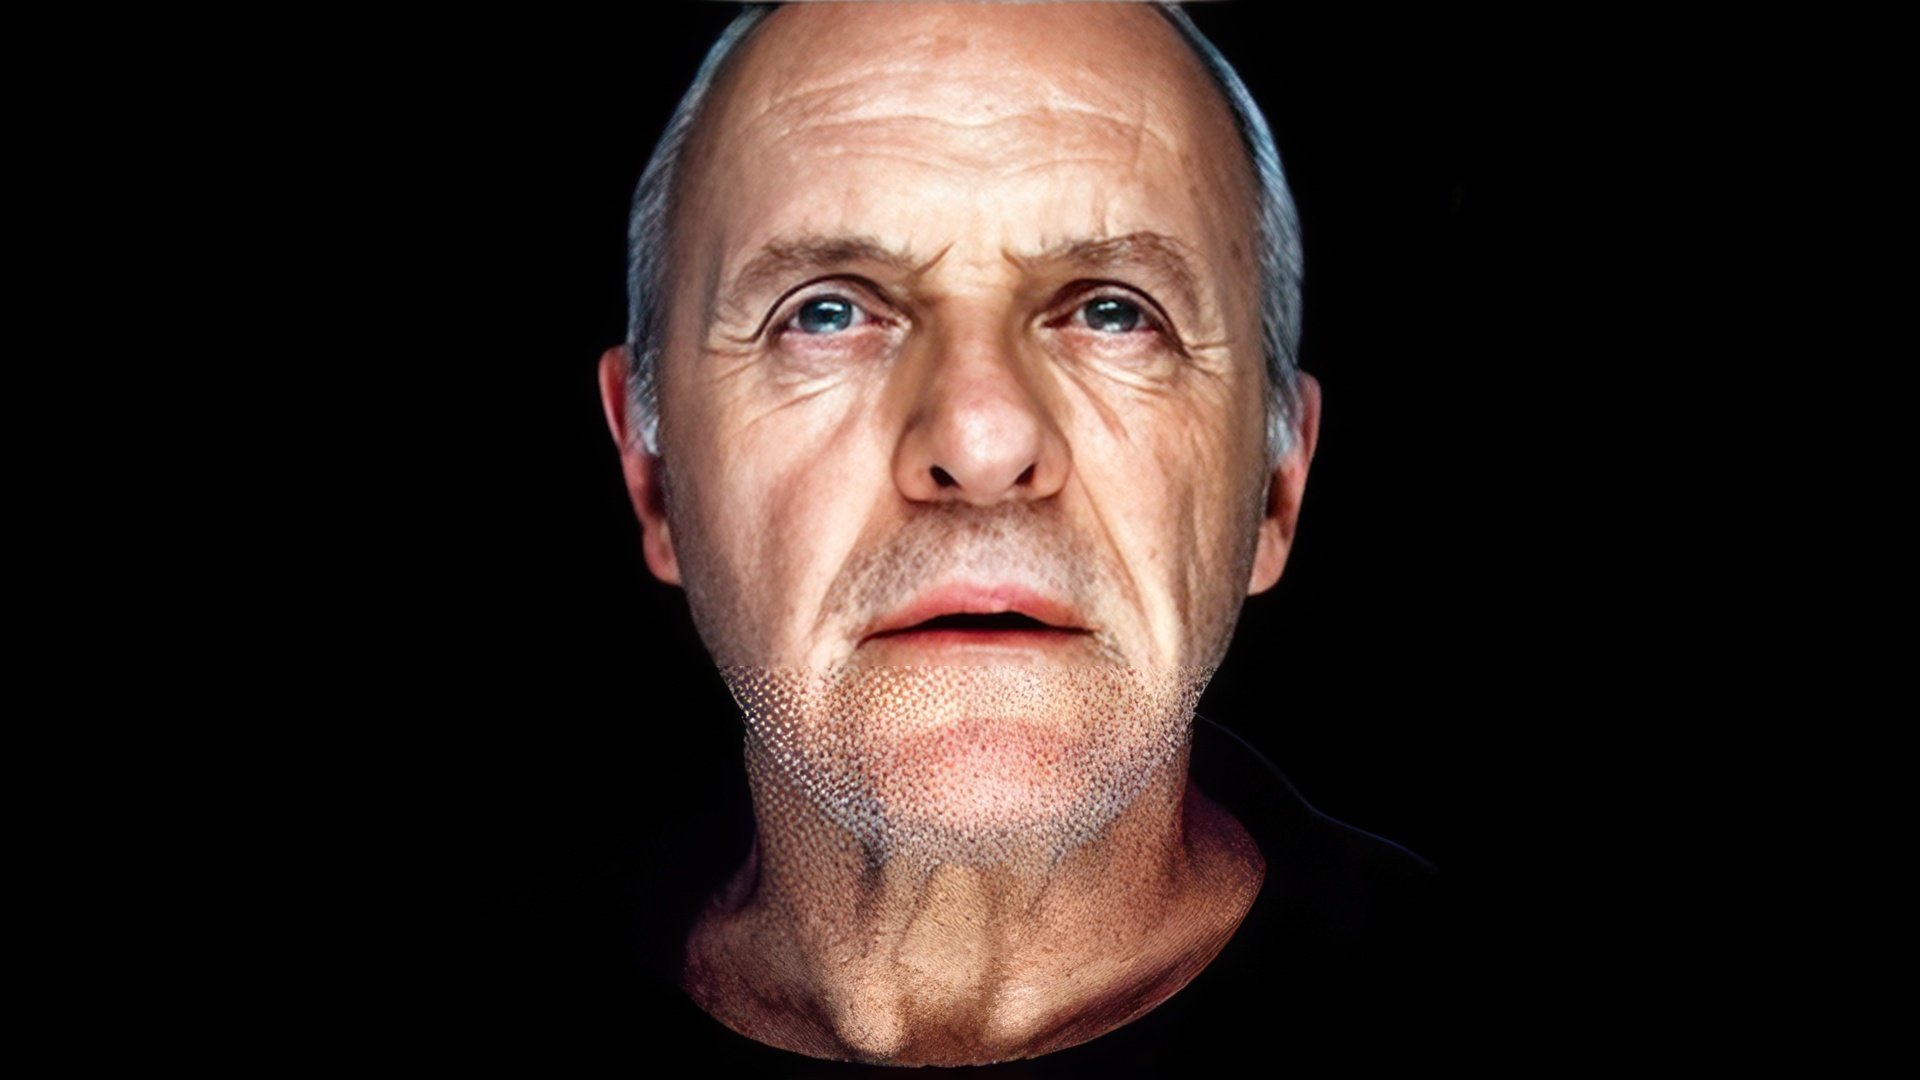 in the photo: Anthony Hopkins